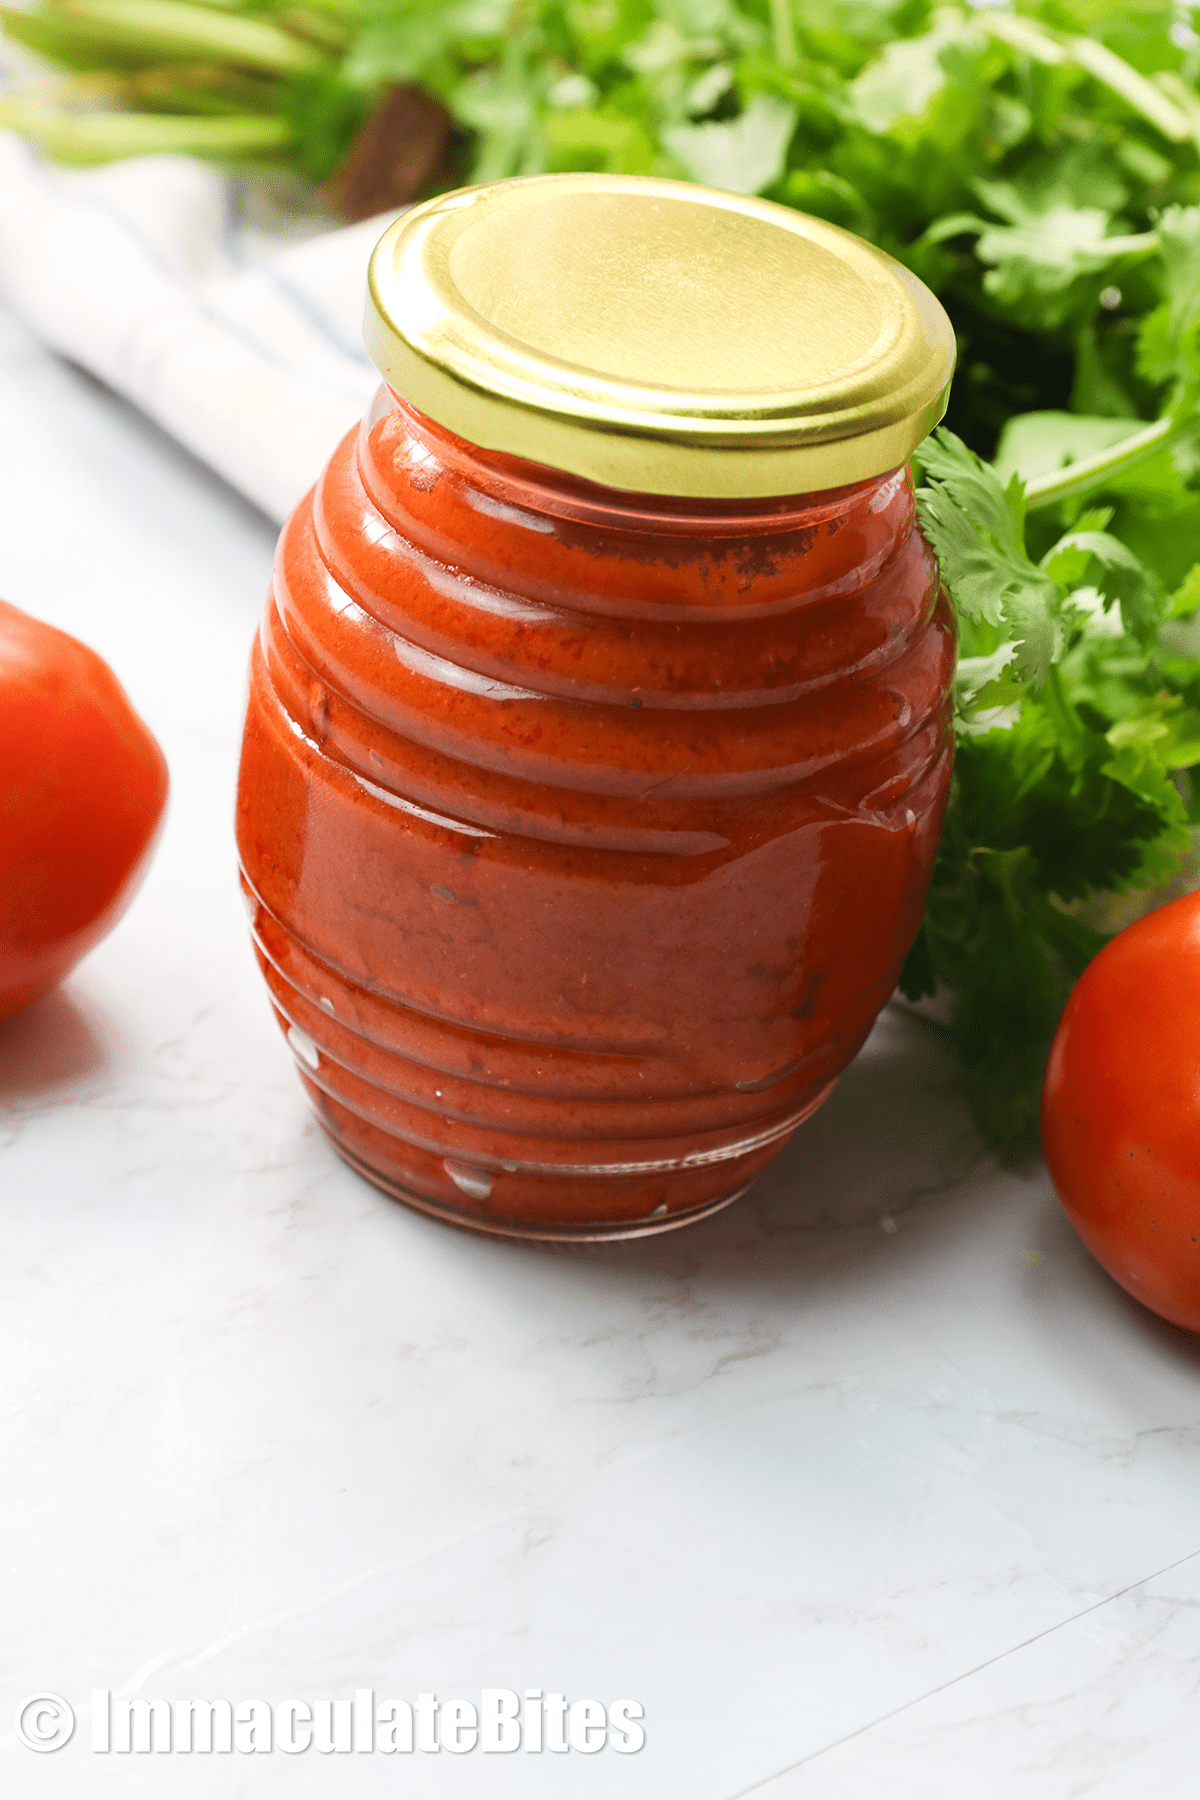 Thicker tomato paste in a sealed jar